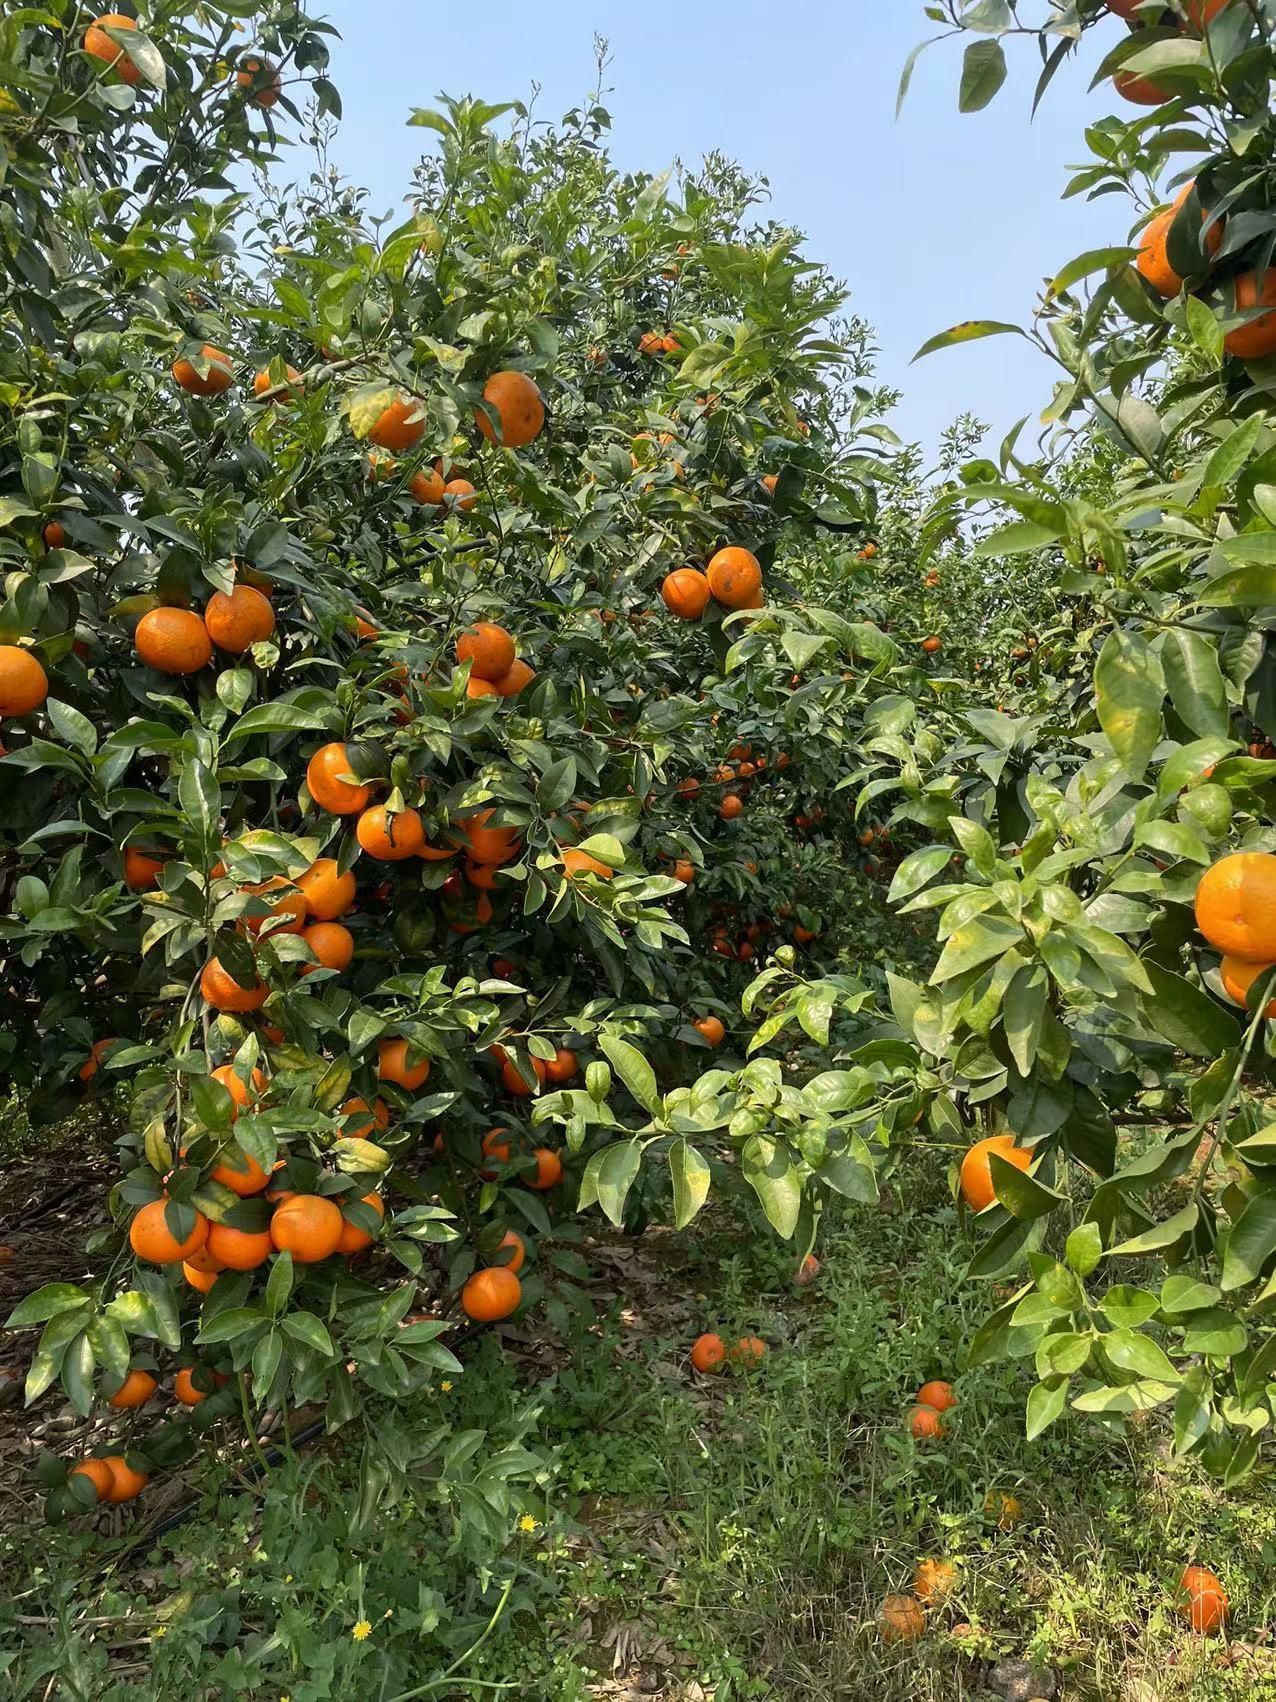 Homystar company innovates the integration of marketing model of mandarin orange to enhance the added value of agricultural products